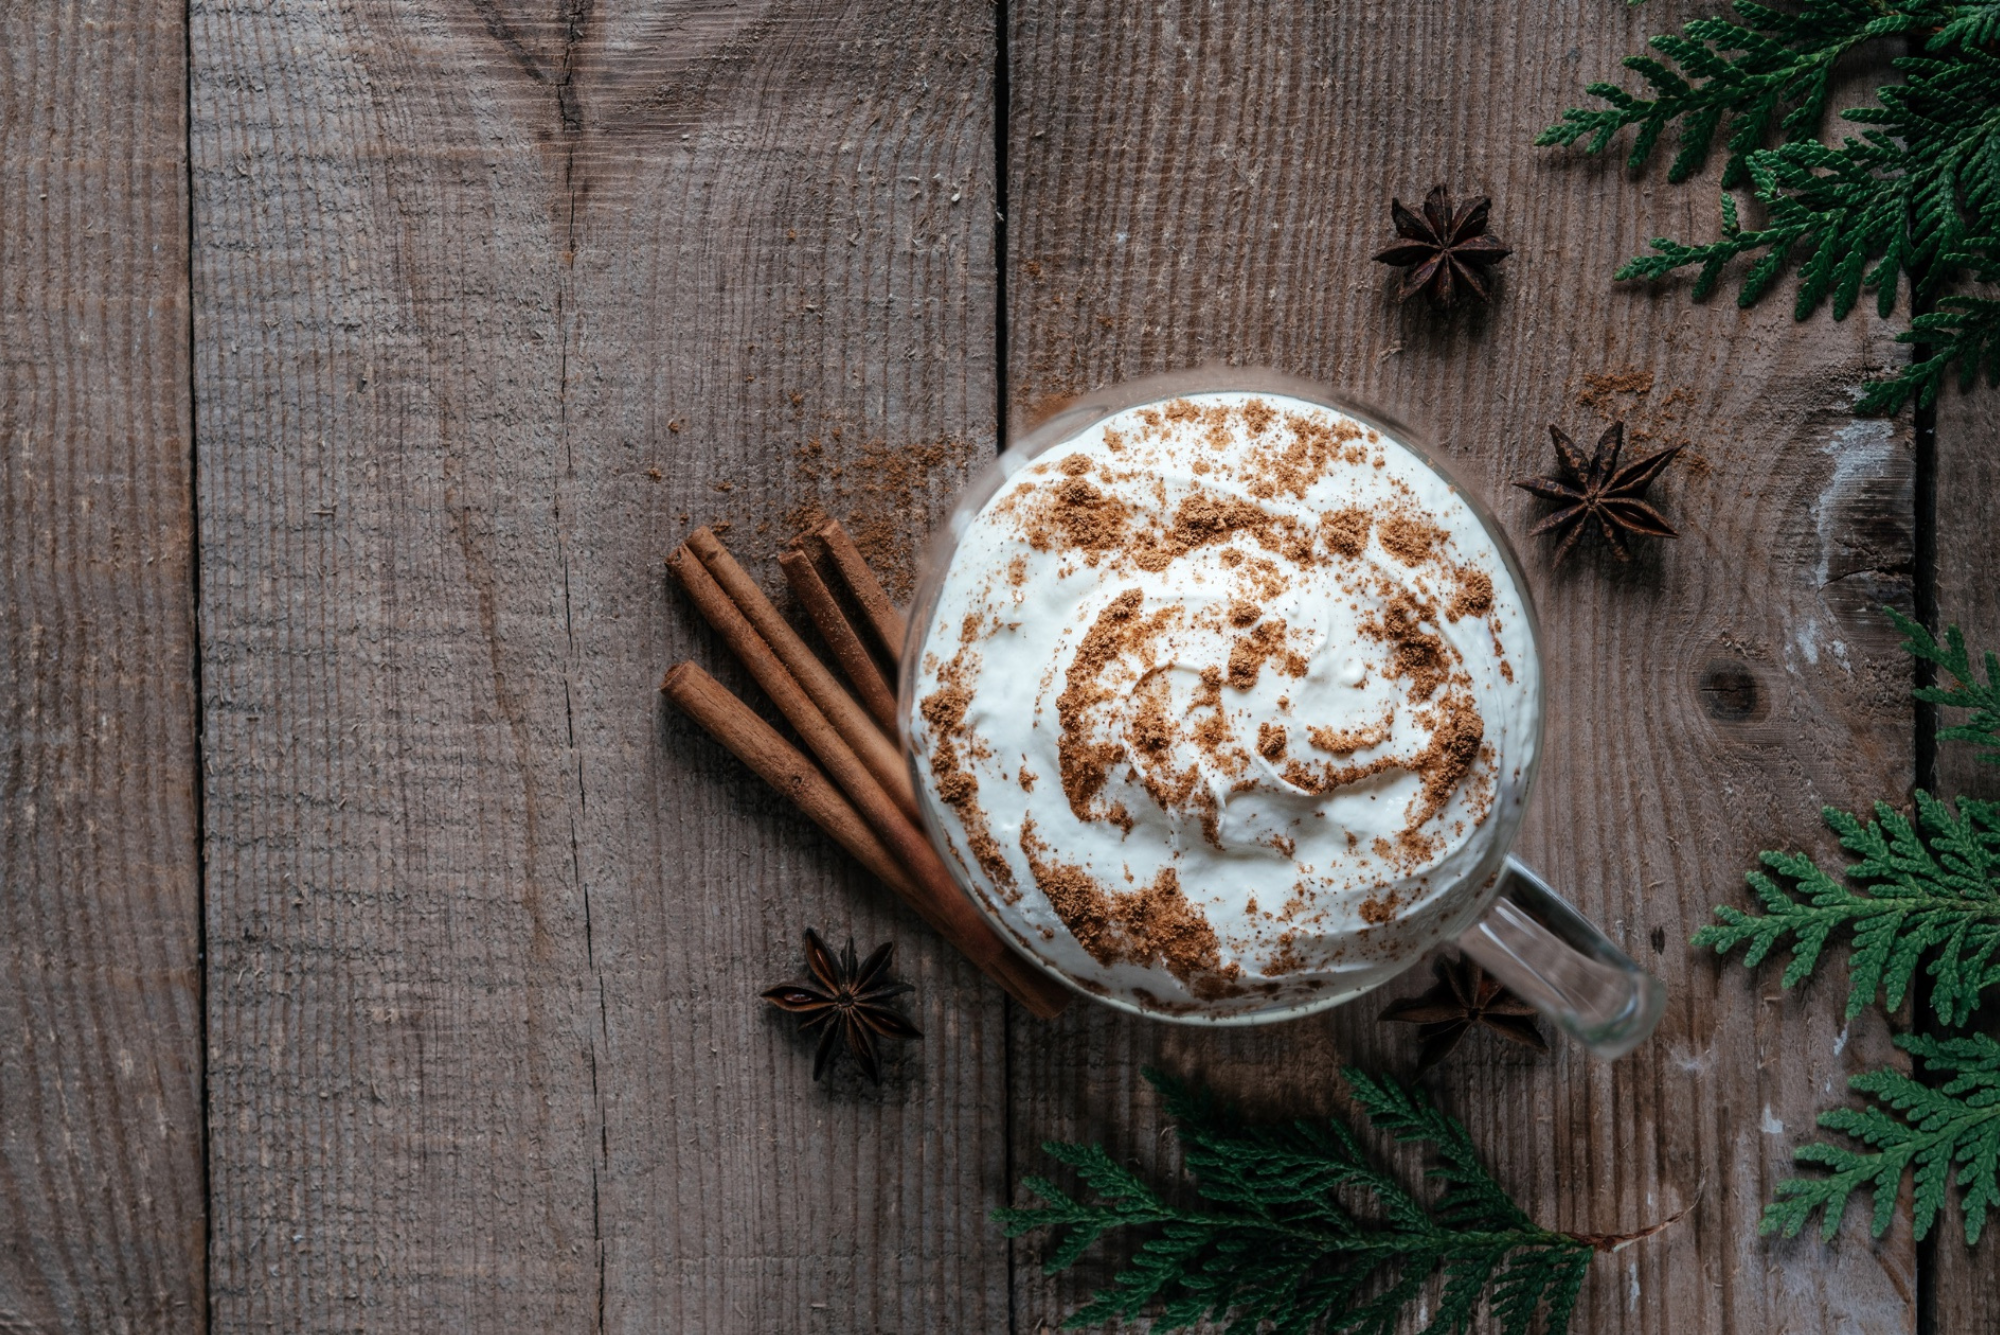 We've compiled the ultimate guide to warming up your winter in New York City. From cozy cafes to chic bars, explore the city's top spots serving up festive beverages that will make your season merry and bright. Don't miss out on the most delicious hot chocolates, spiced lattes, and seasonal cocktails.